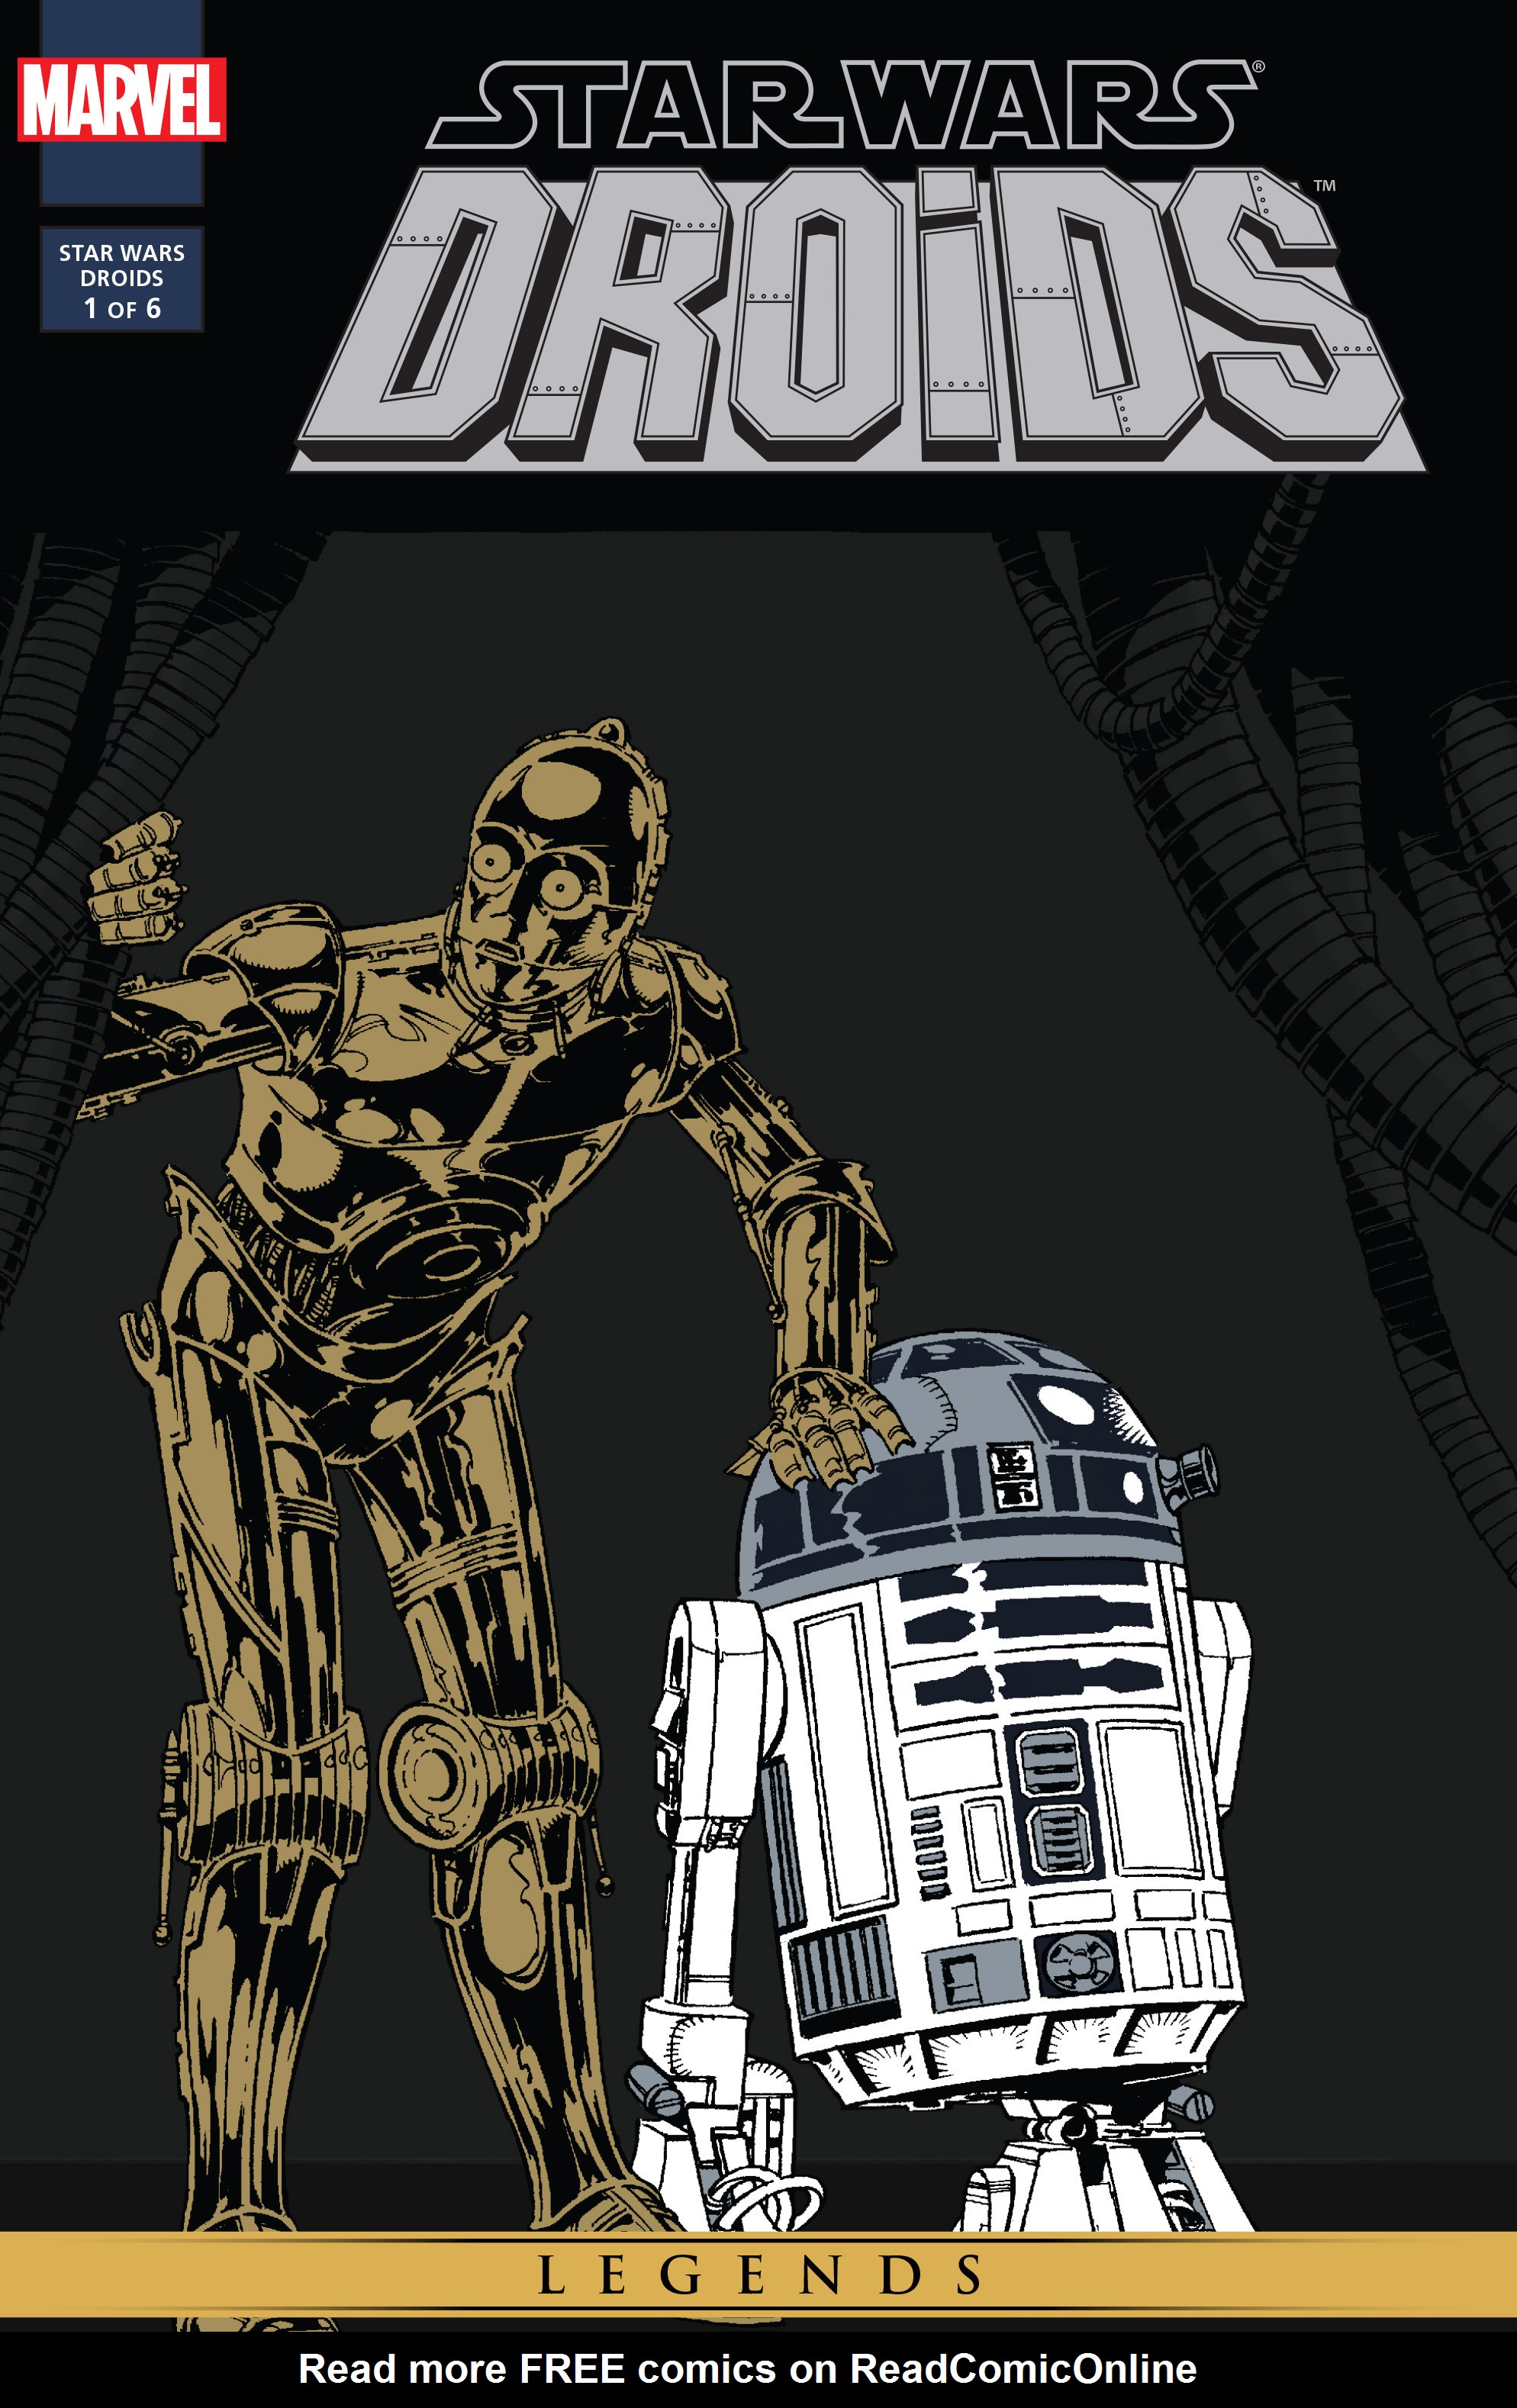 Porn Drolds - Star Wars Droids 1 | Read Star Wars Droids 1 comic online in high quality.  Read Full Comic online for free - Read comics online in high quality .